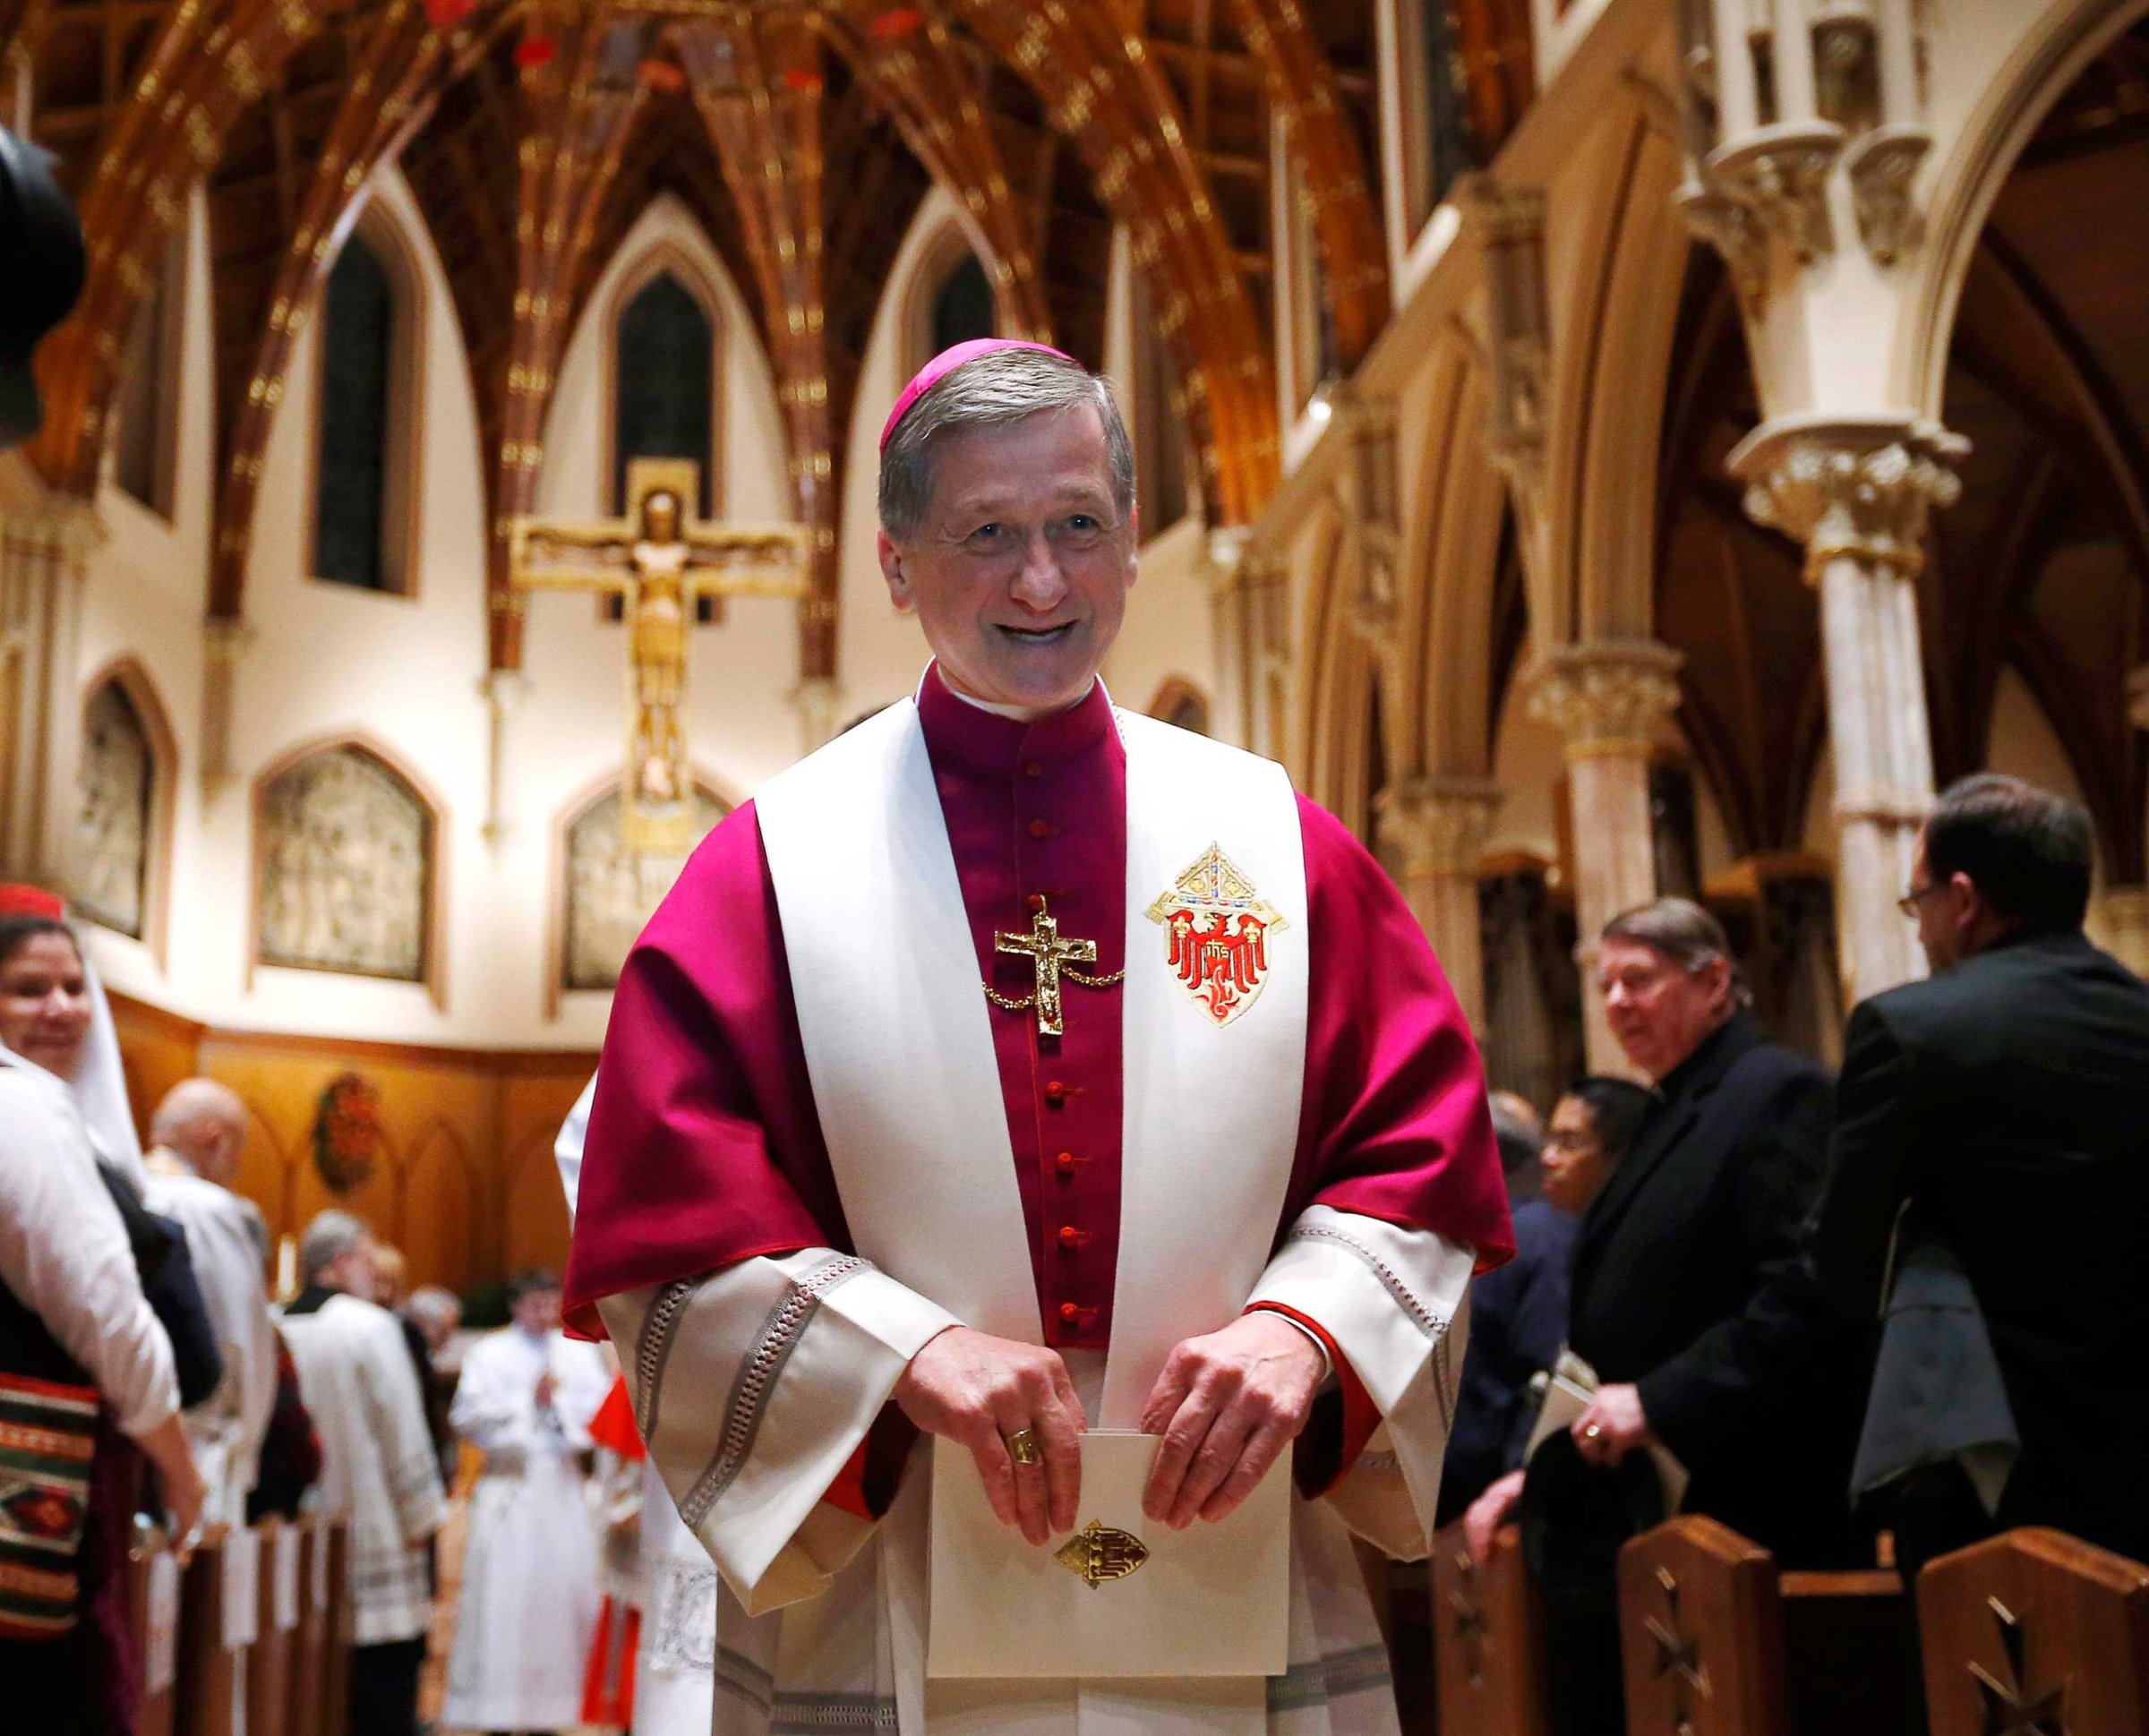 Bishop Blase Cupich, Pope Francis' first major appointment in the hierarchy of the U.S. Catholic Church, leaves Holy Name Cathedral in Chicago